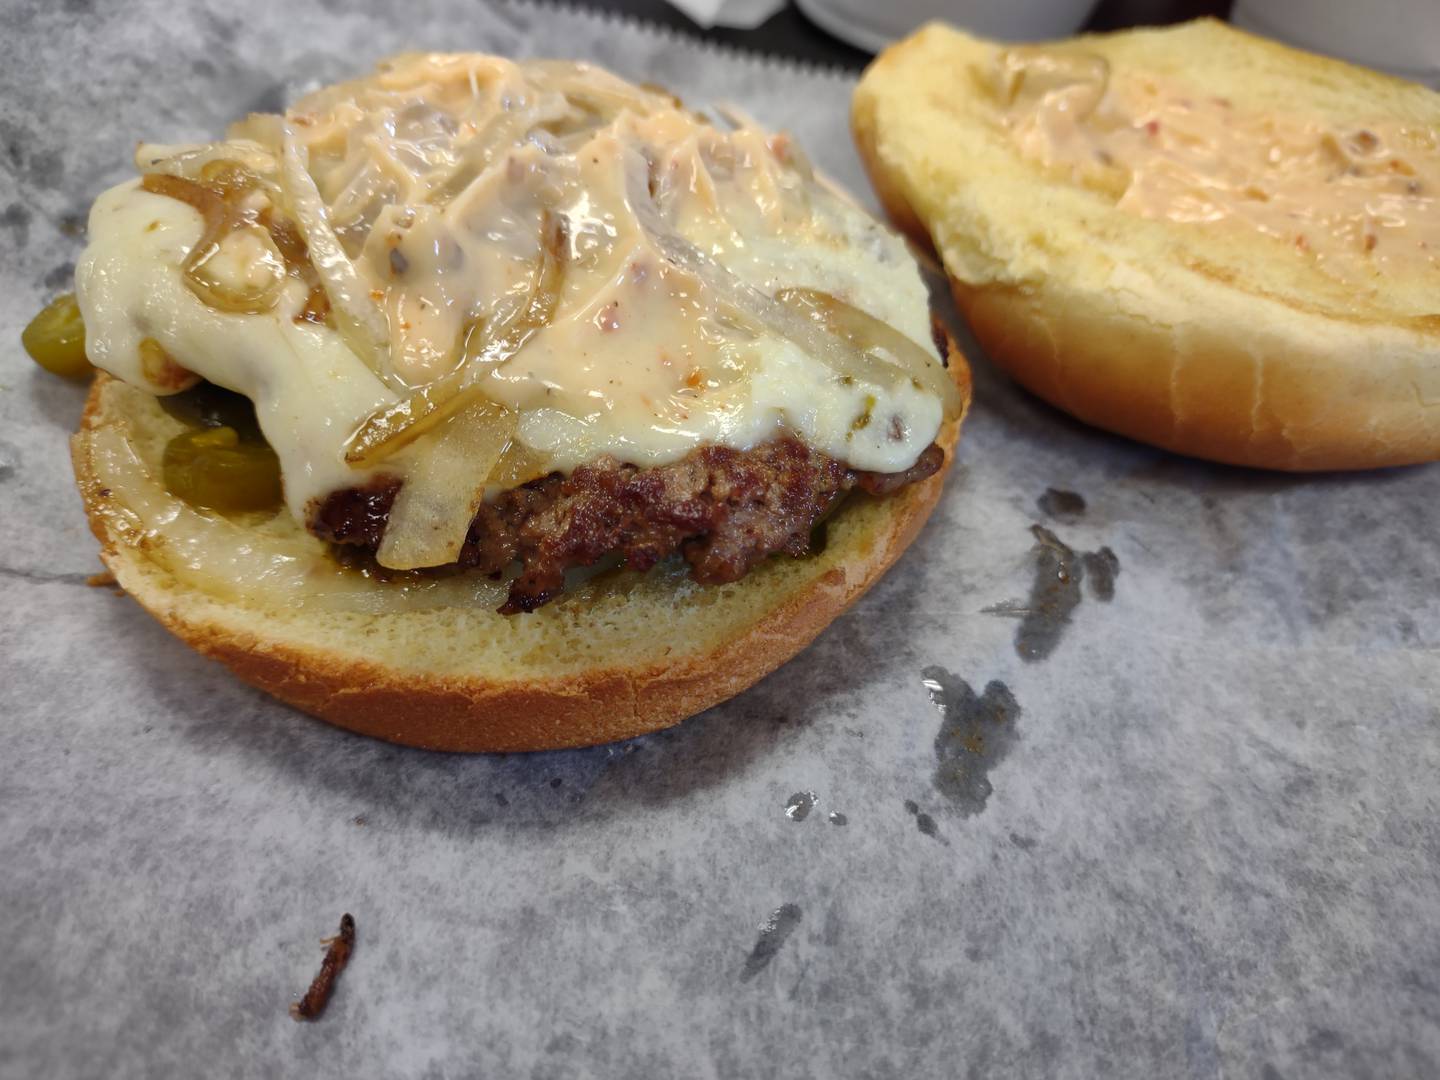 The Chipotle burger at John's Place in Peru includes pepperjack cheese, jalapeno slices, grilled onions and chipotle mayo. The flavor has mild heat.